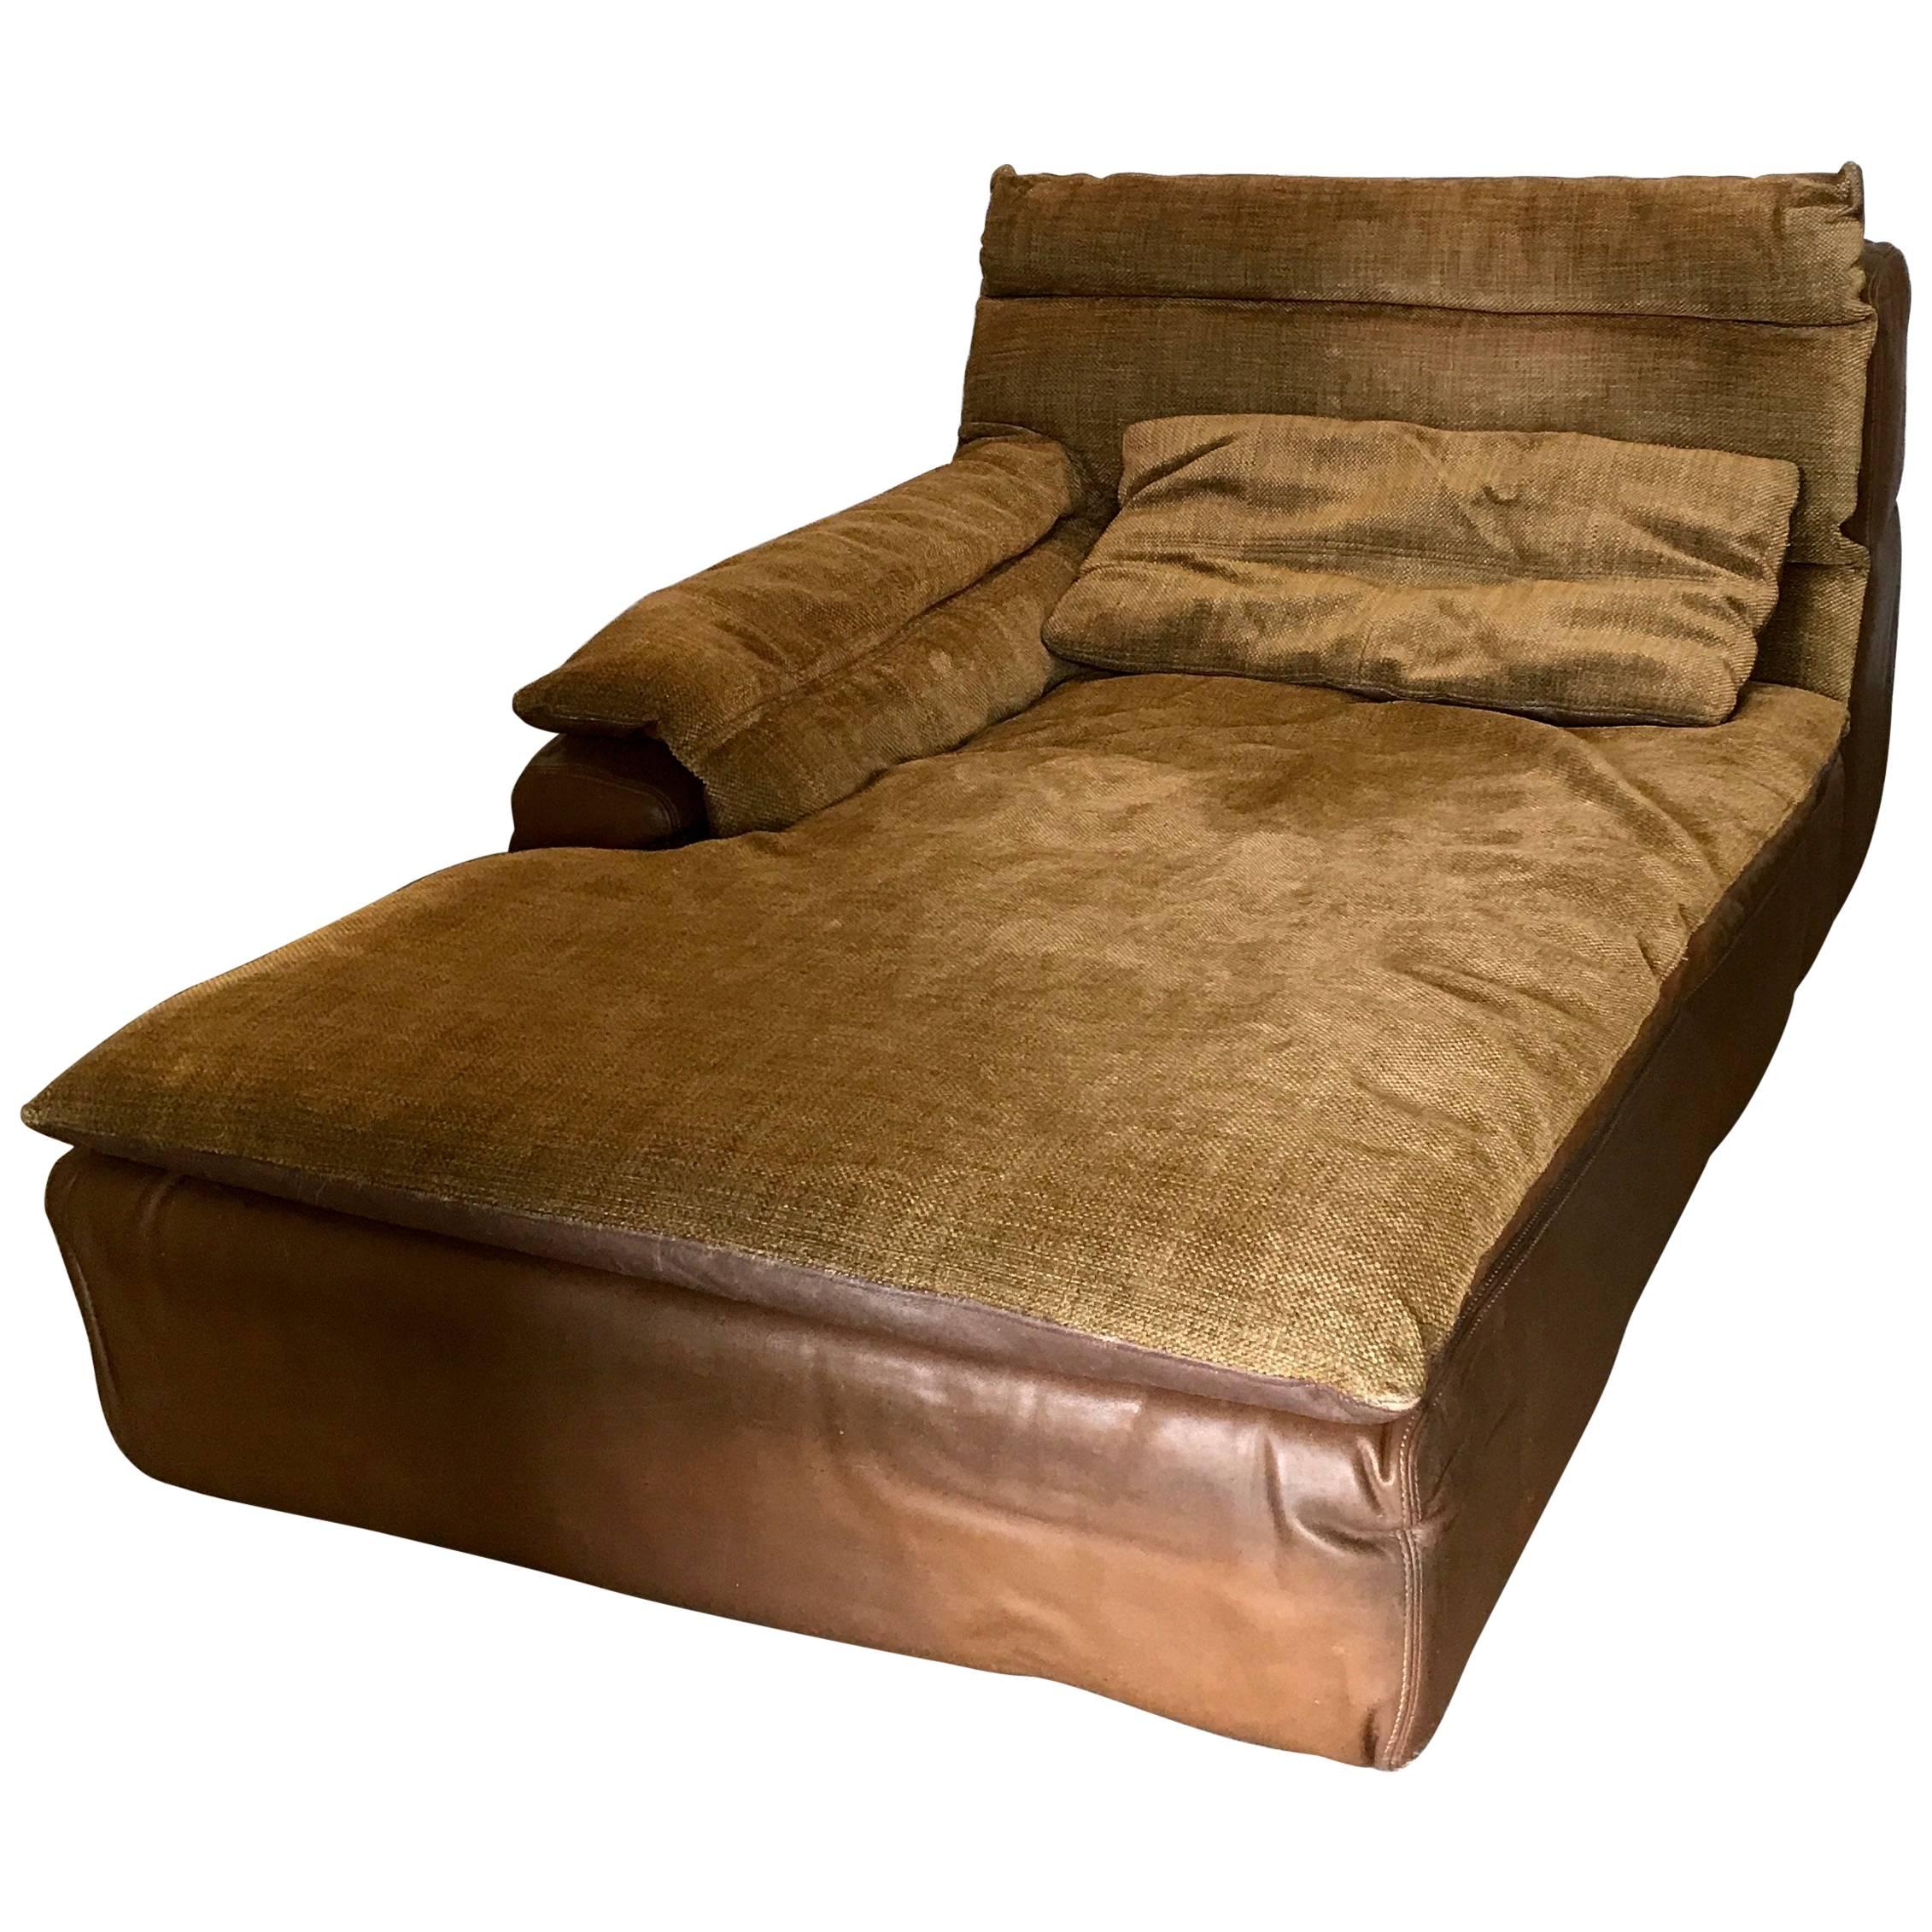 Glamorous Suede Leather Daybed Signed by Rossi di Albizzate For Sale